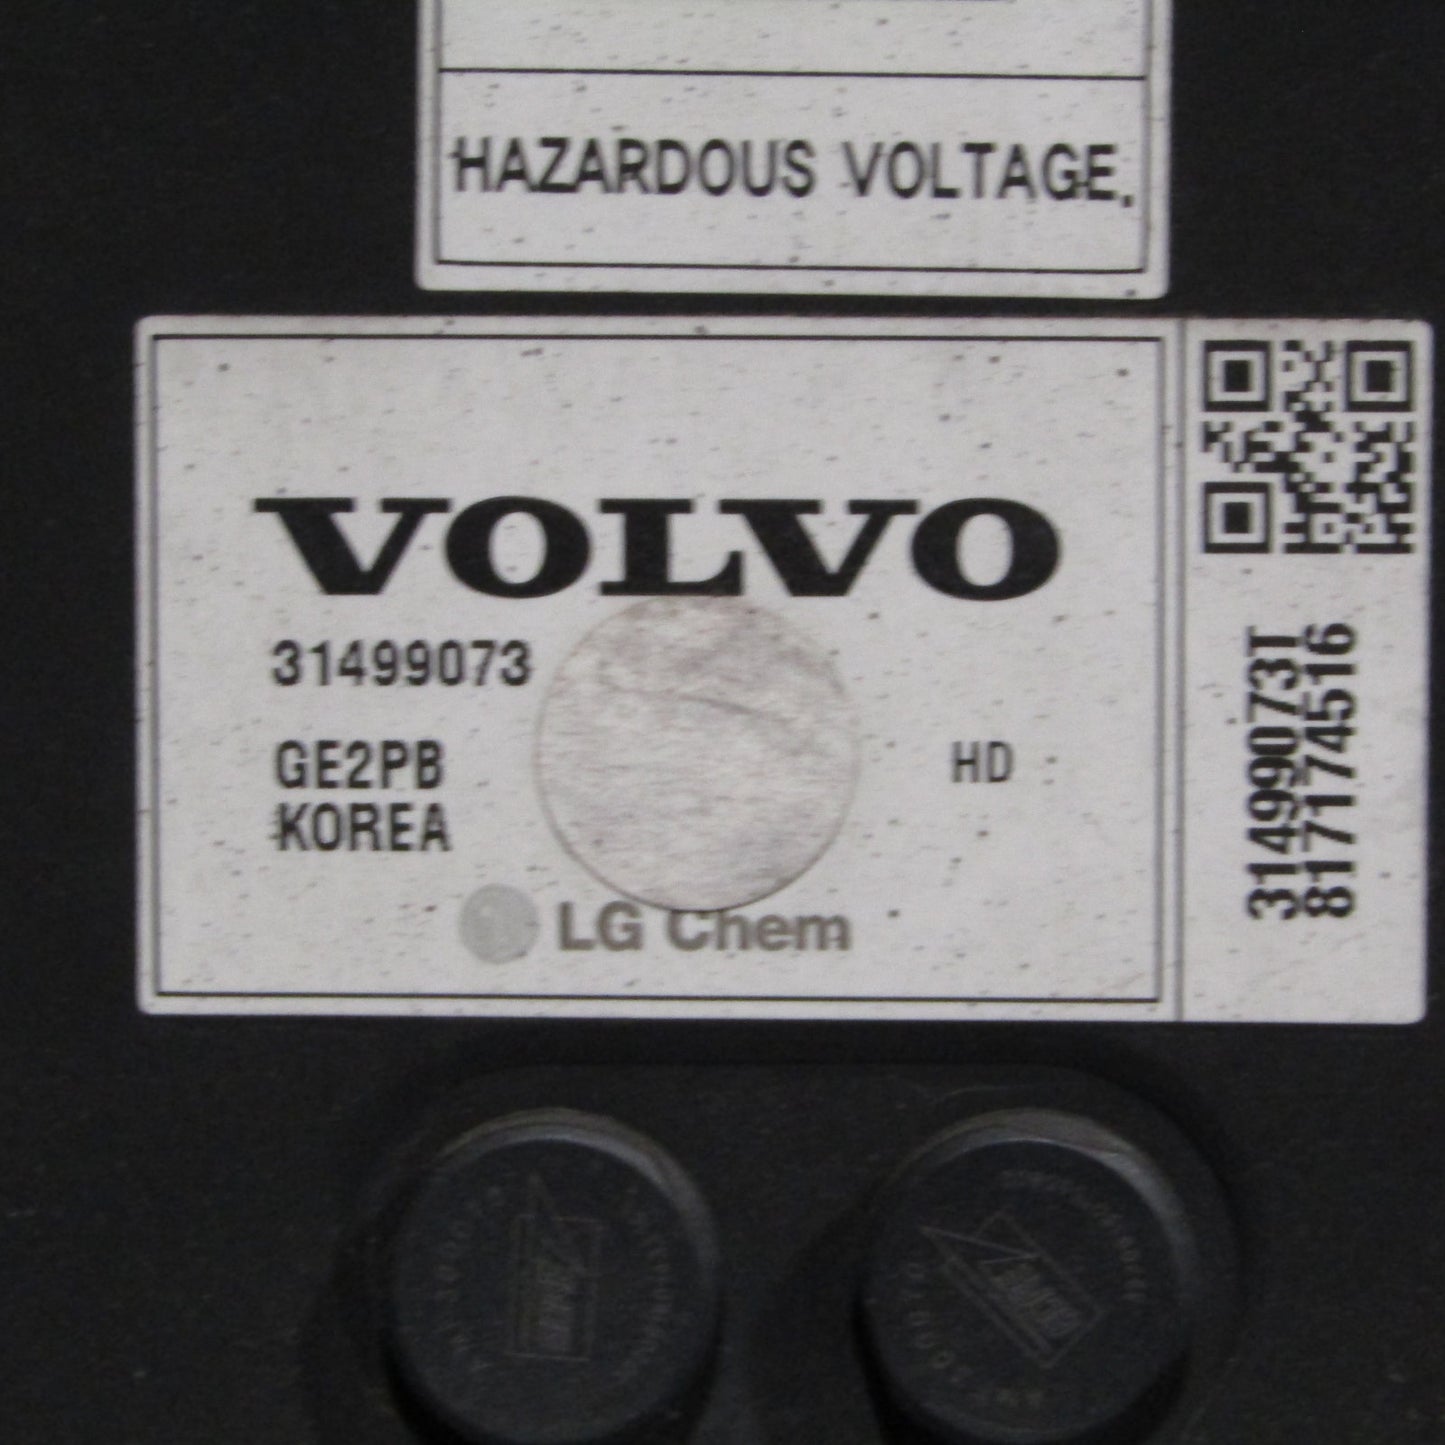 Volvo XC90 / 18.8 kWh / Battery Pack - with Damaged Plugs - order of 10x